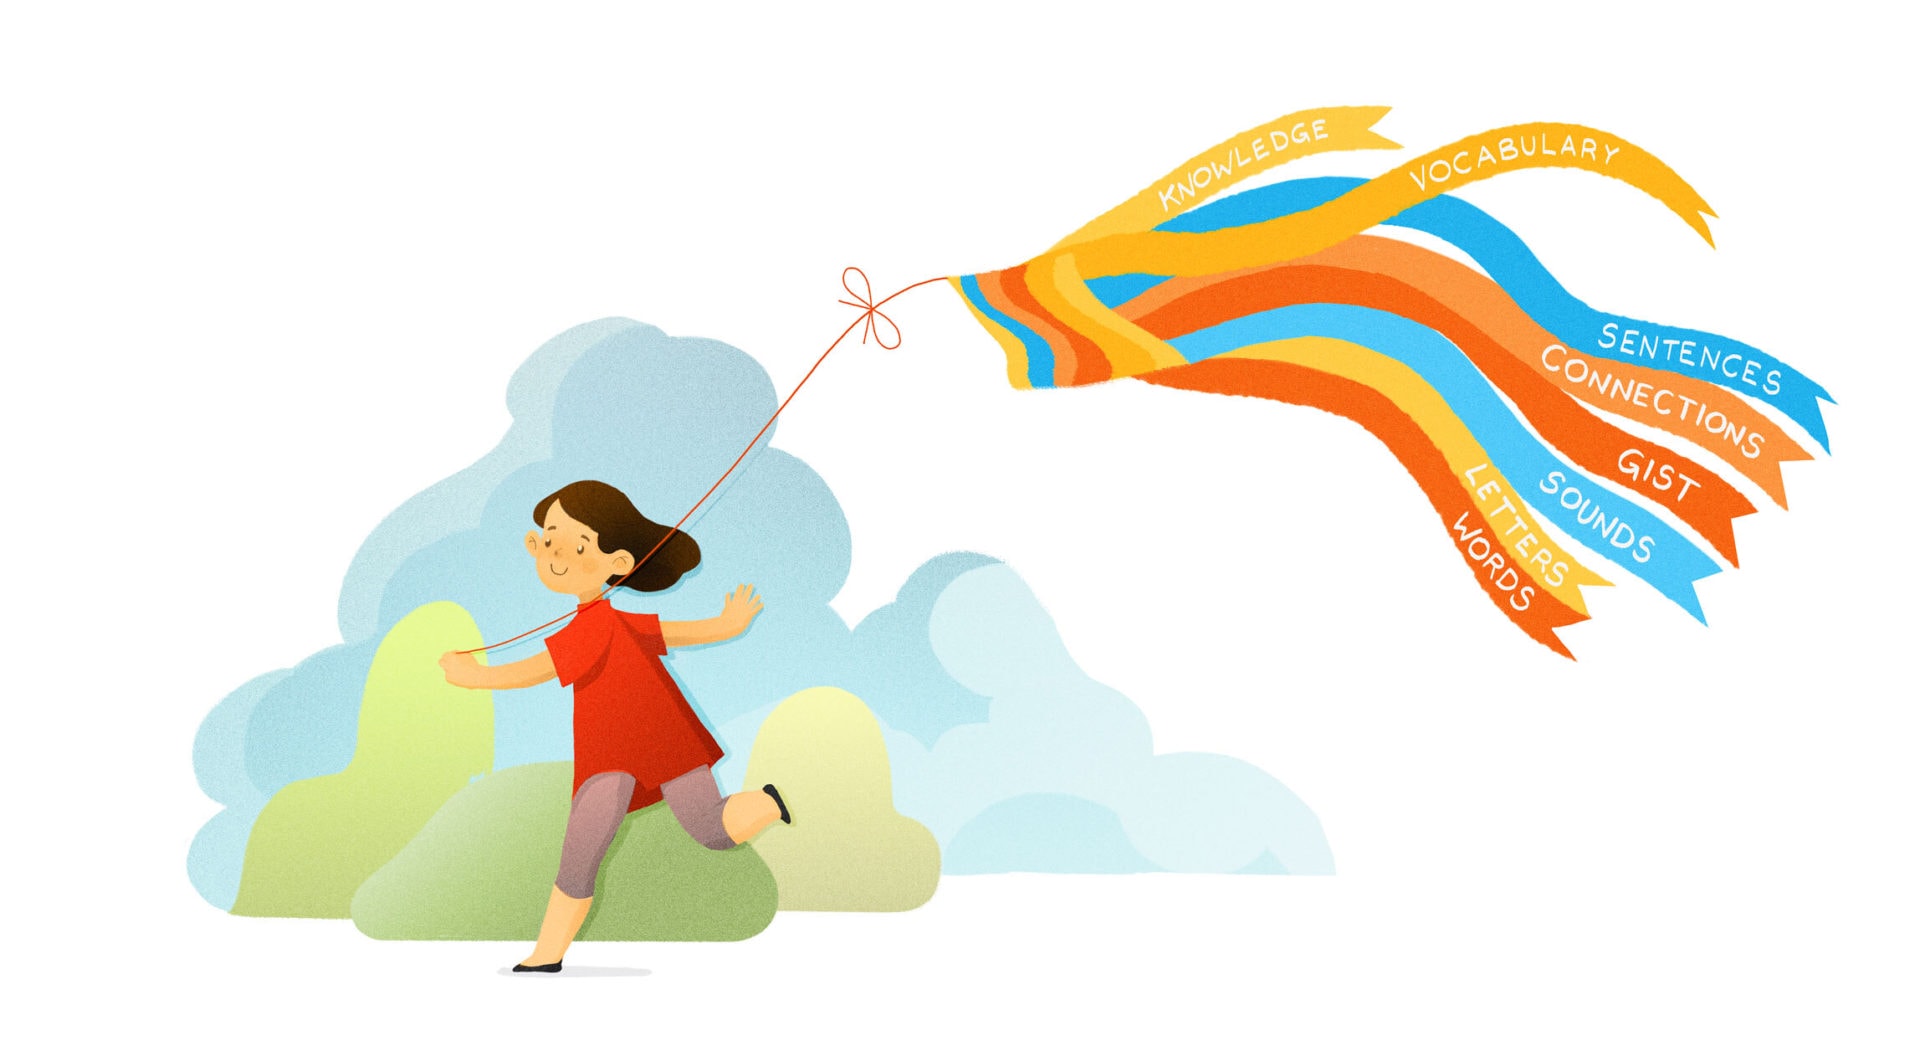 Illustration of a young girl running with a colorful kite trailing words like 